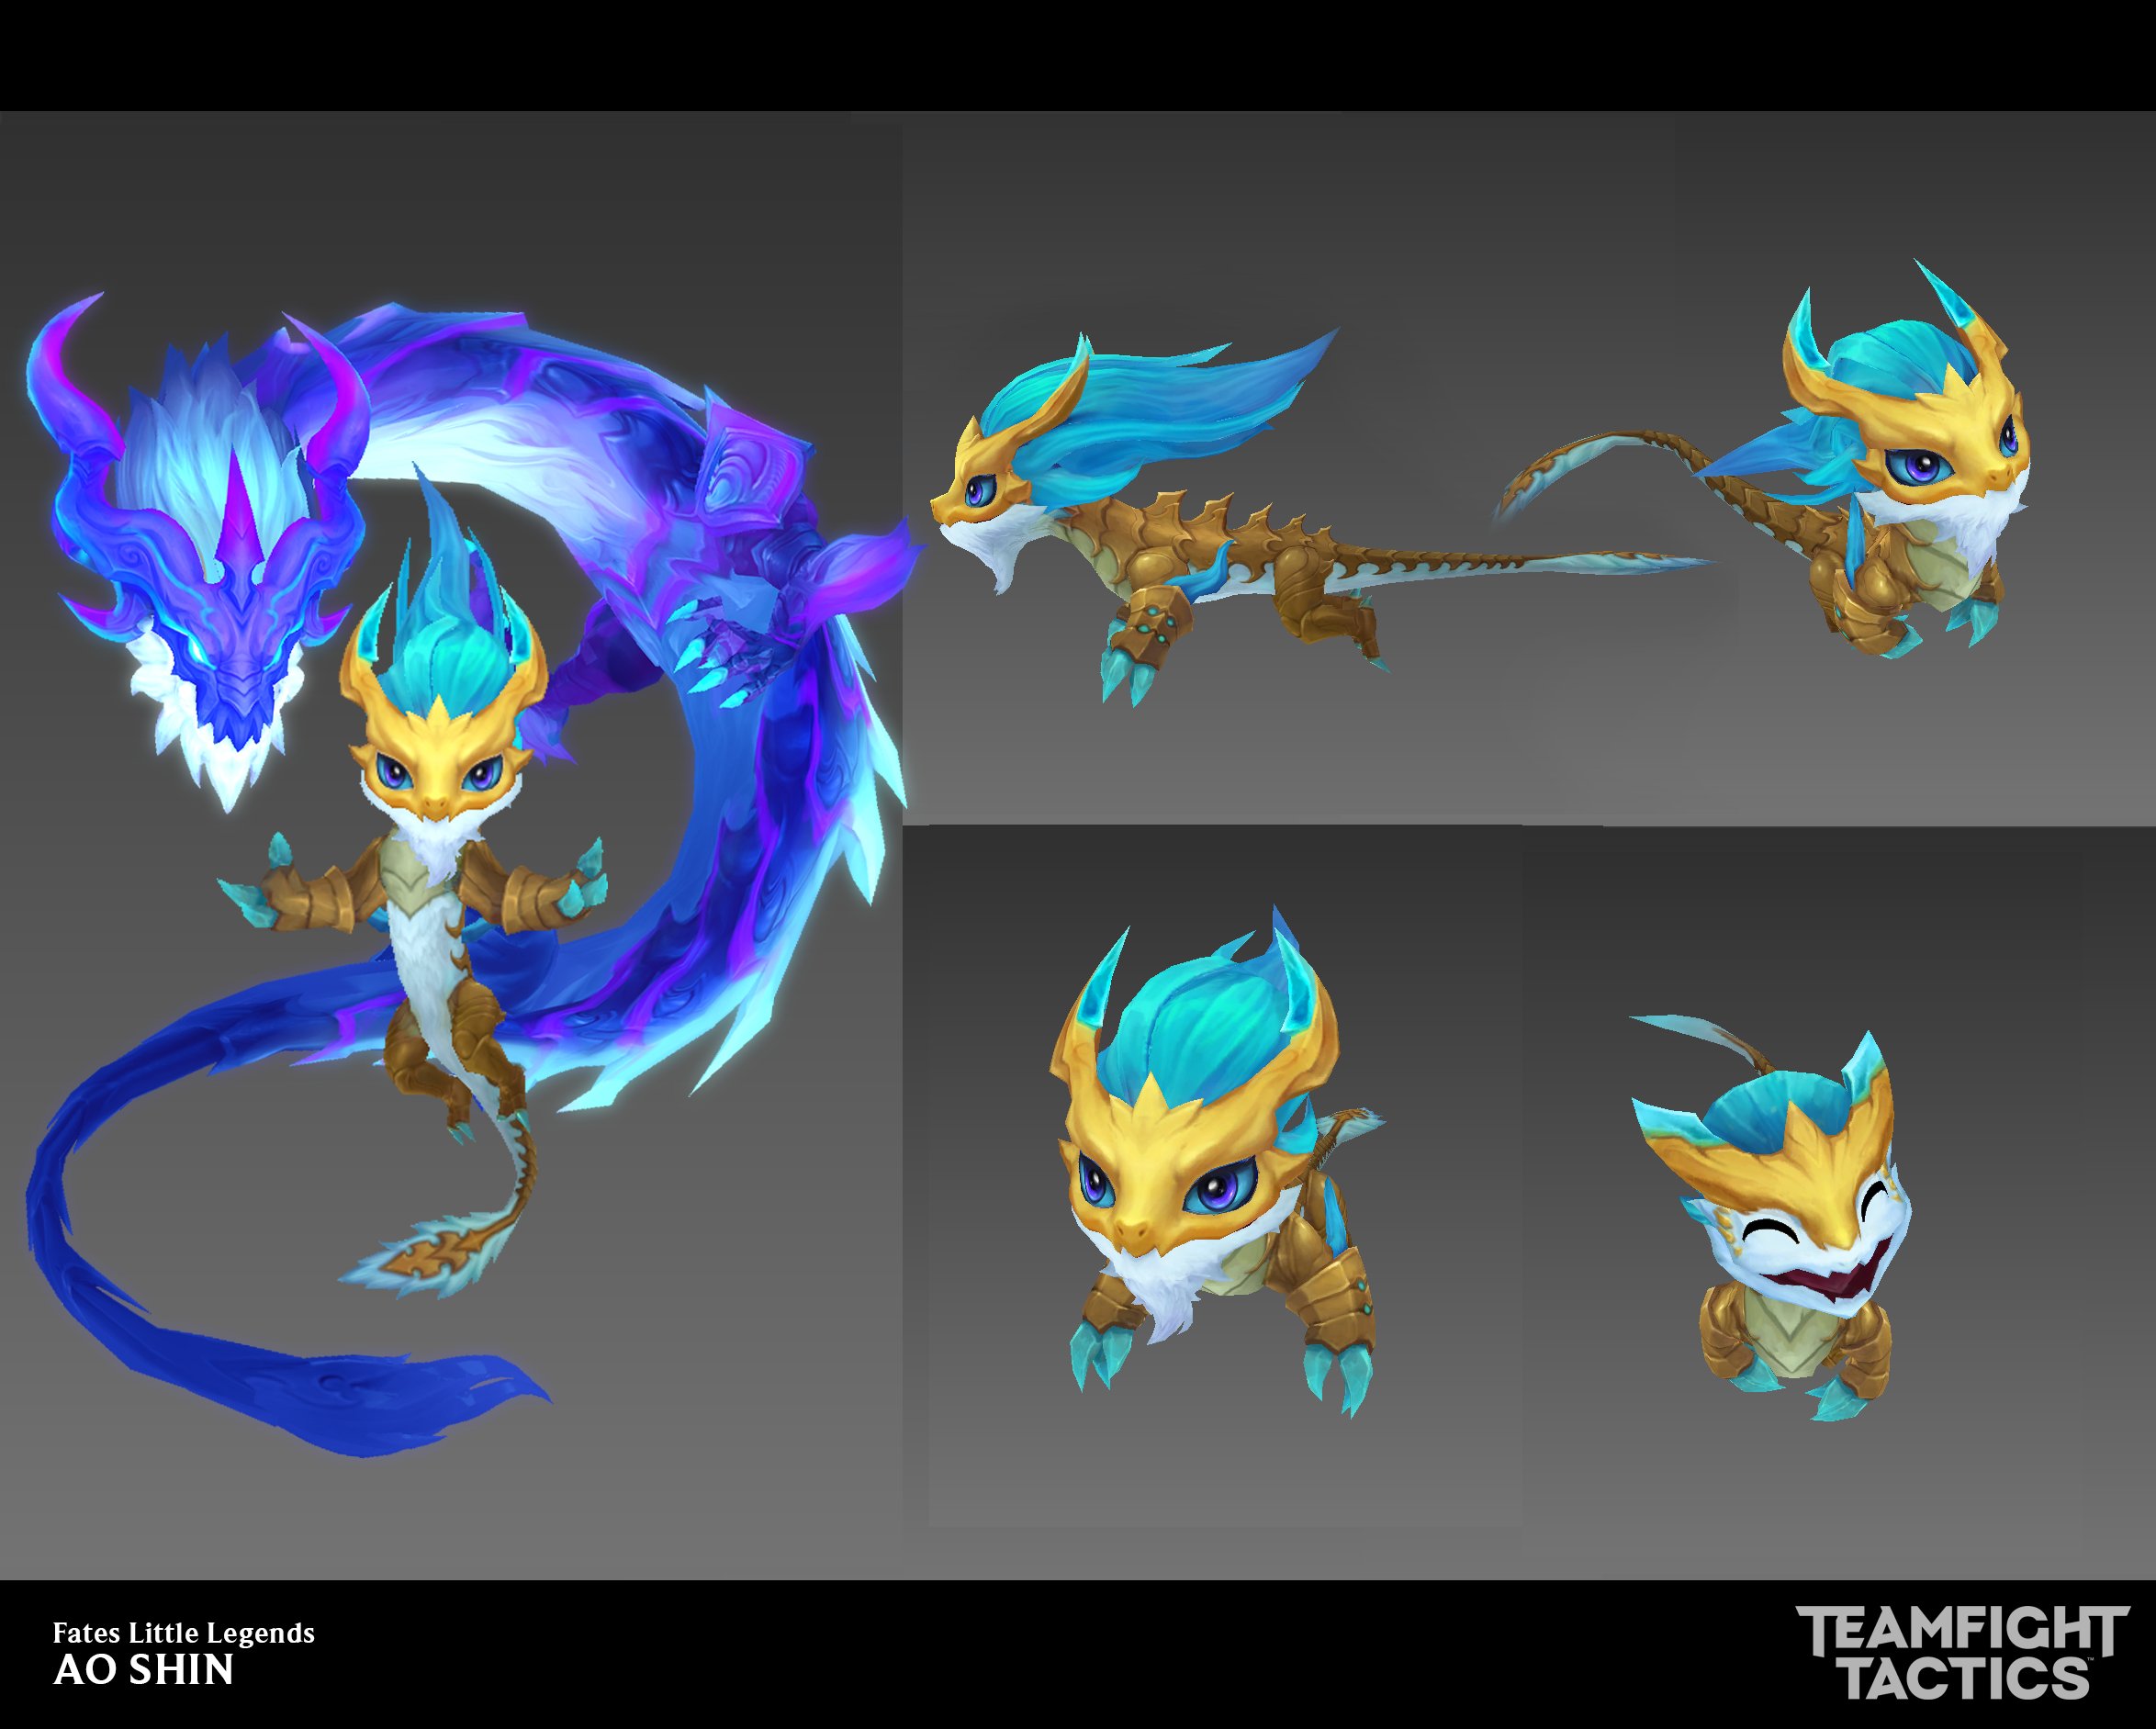 Tommy Gunardi Teguh on X: (3/3) Dragon Little Legends - Ao Shin! ⚡️ A smol  piece of League history. The flashy guitarist of the trio! We can't simply  do a serpentine dragon